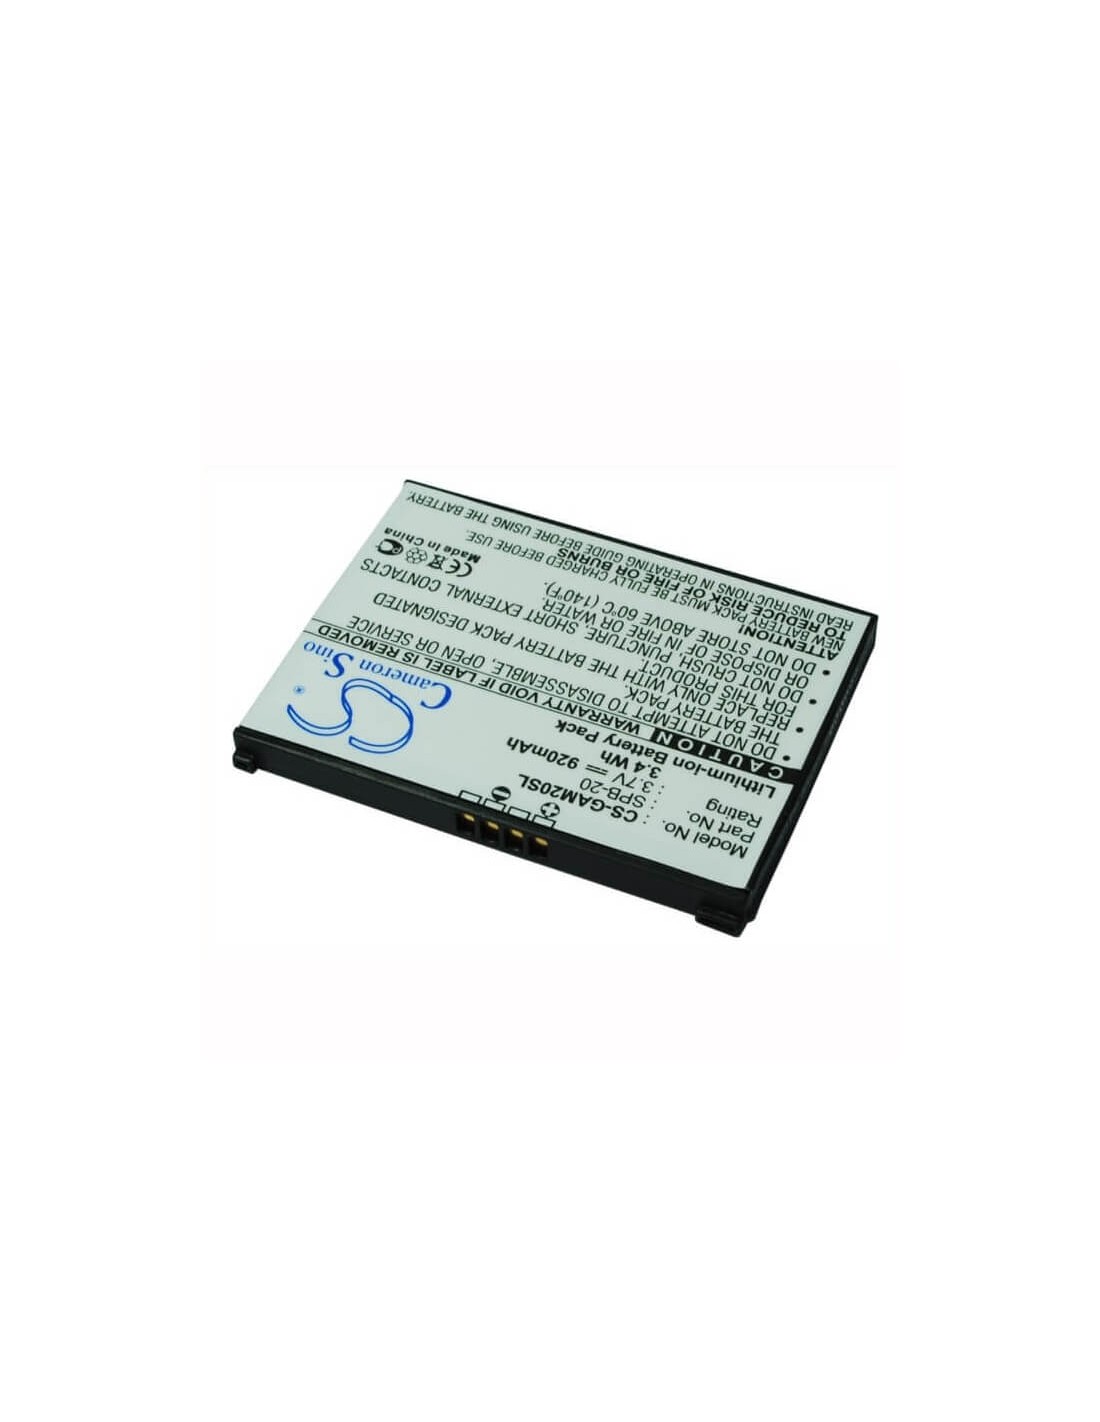 Battery for Garmin-Asus nuvifone M20, nuvifone M20US 3.7V, 920mAh - 3.40Wh